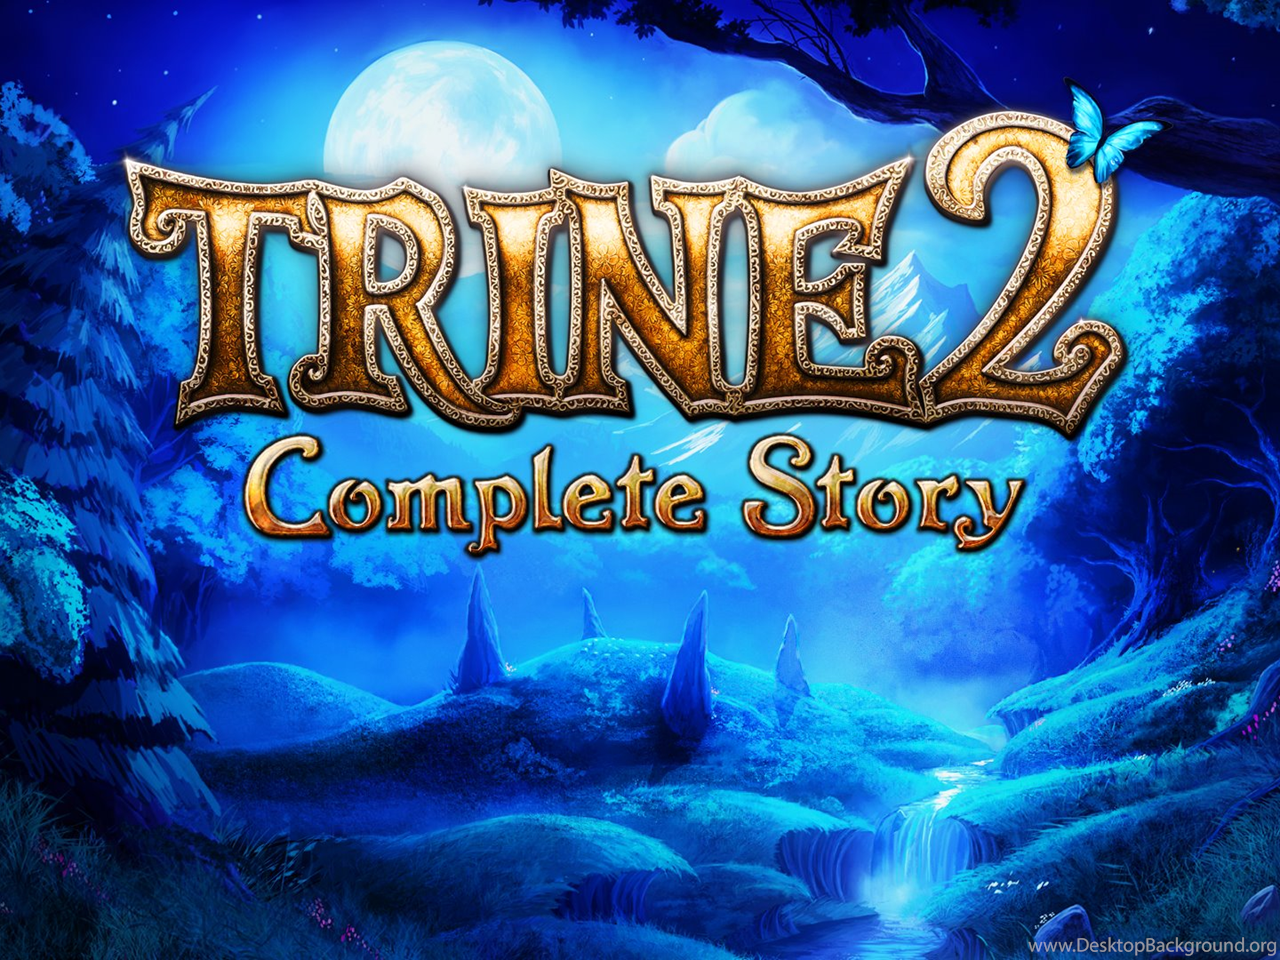 Complete this story. Trine 2. Trine 2 complete story фон. Trine 2: the complete story заставка. Trine 2 complete story персонажи.